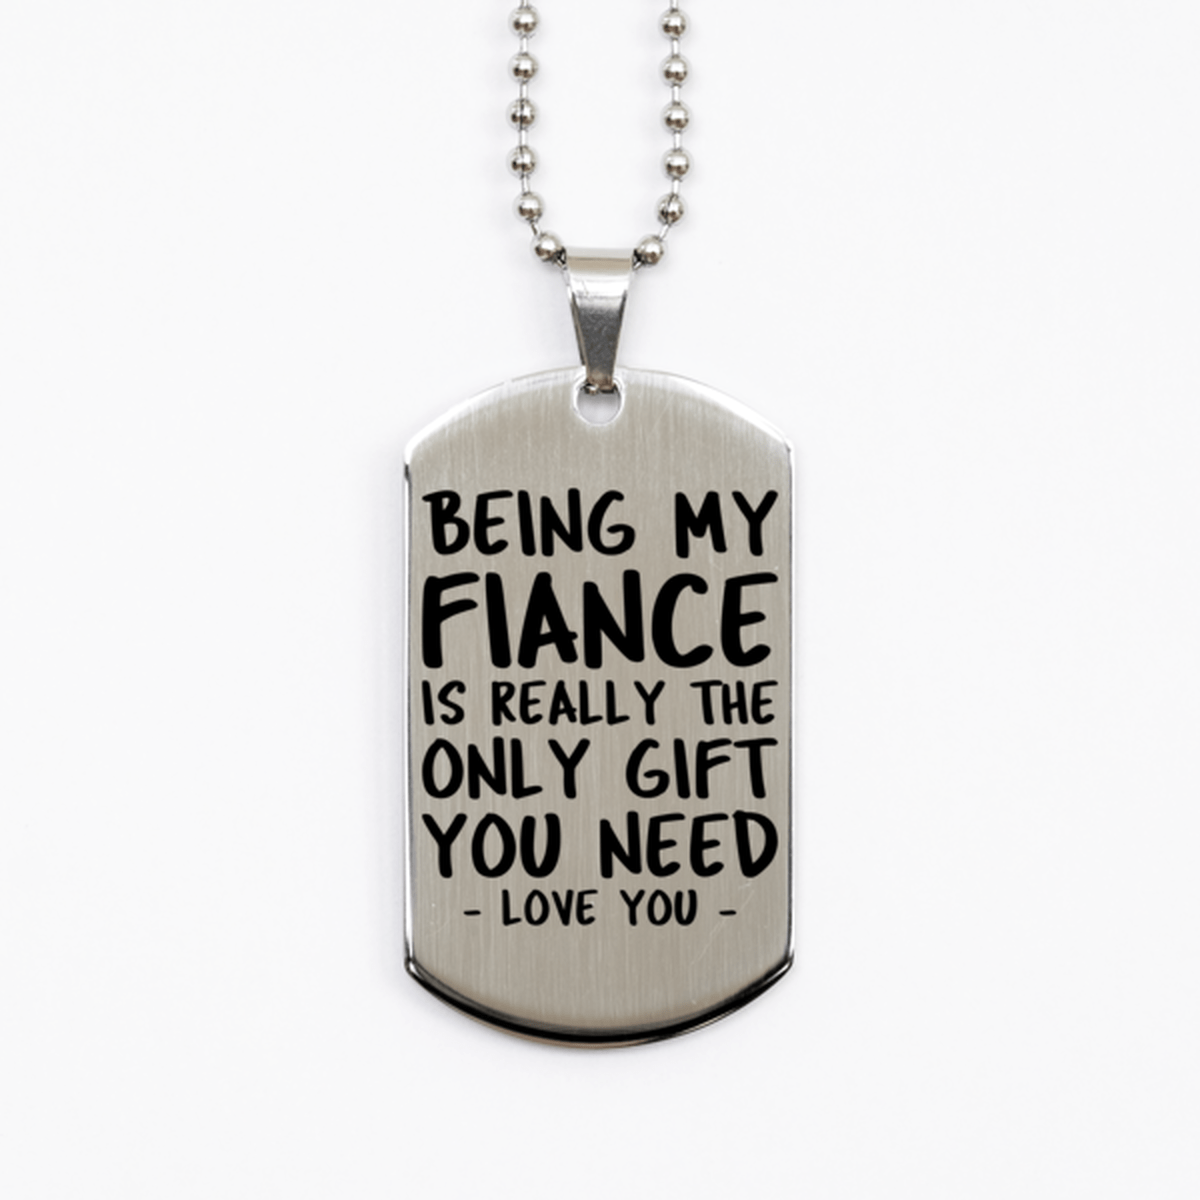 Funny Fiance Silver Dog Tag Necklace, Being My Fiance Is Really the Only Gift You Need, Best Birthday Gifts for Fiance